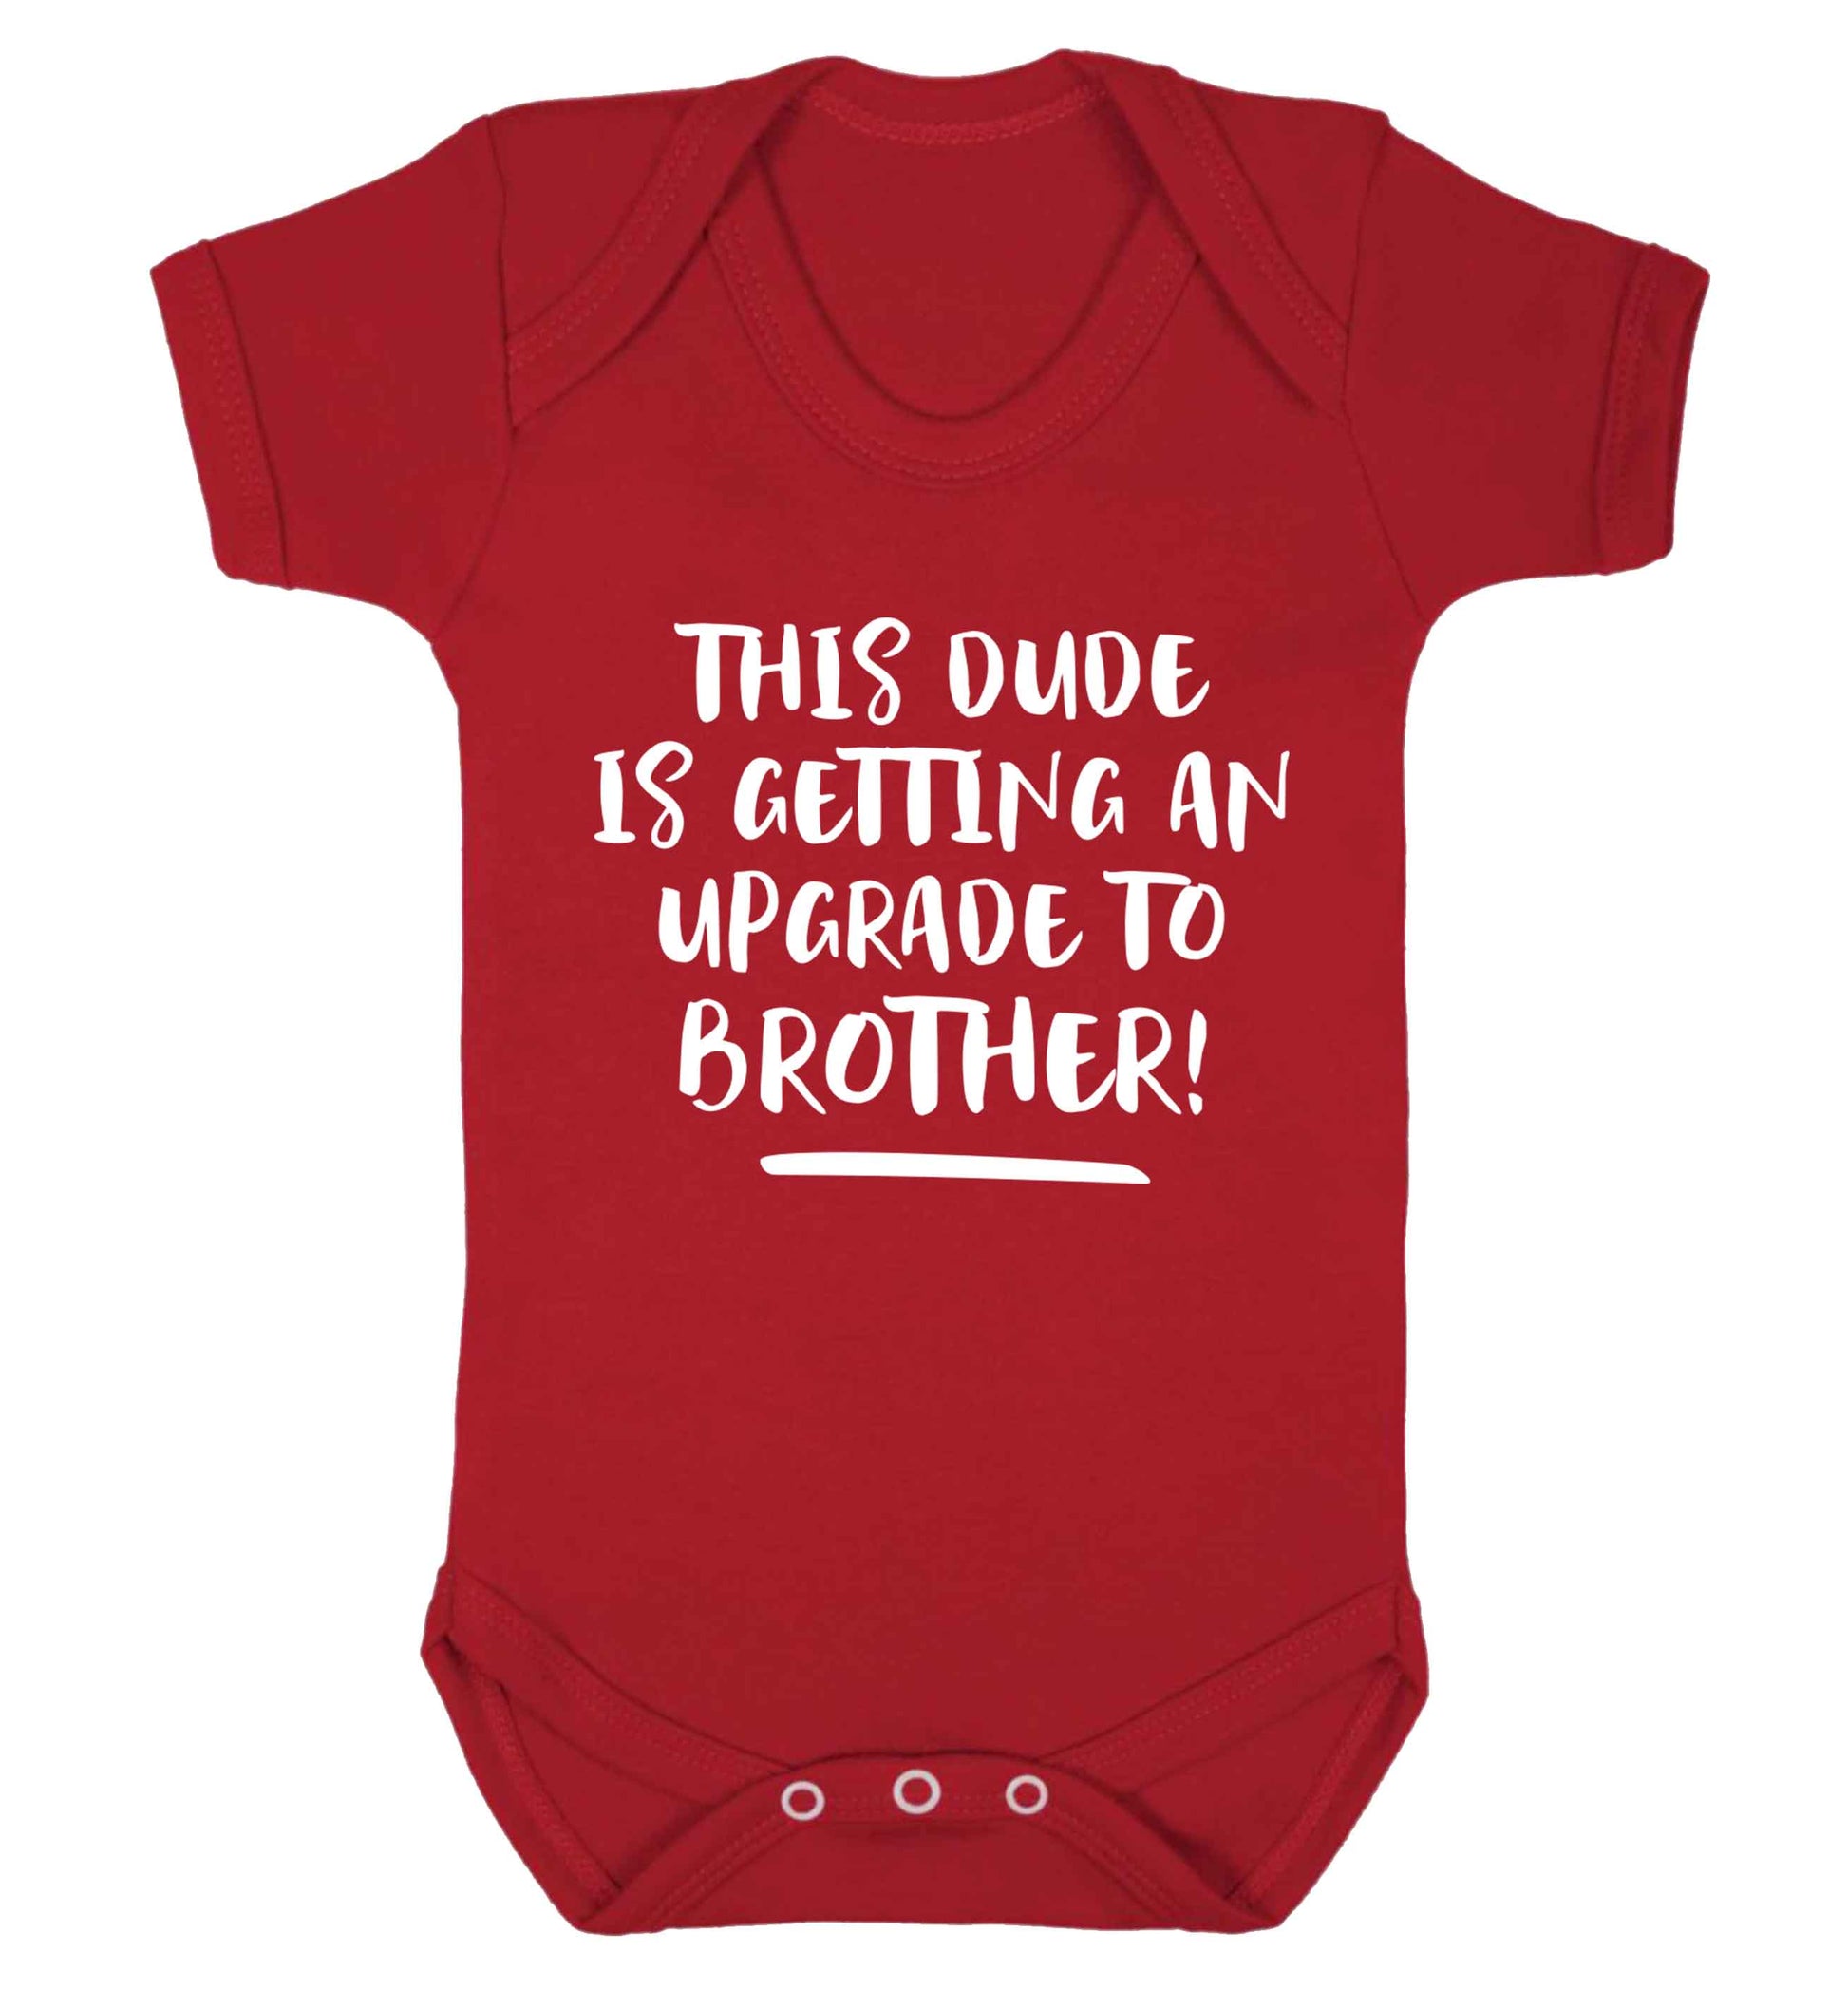 This dude is getting an upgrade to brother! Baby Vest red 18-24 months